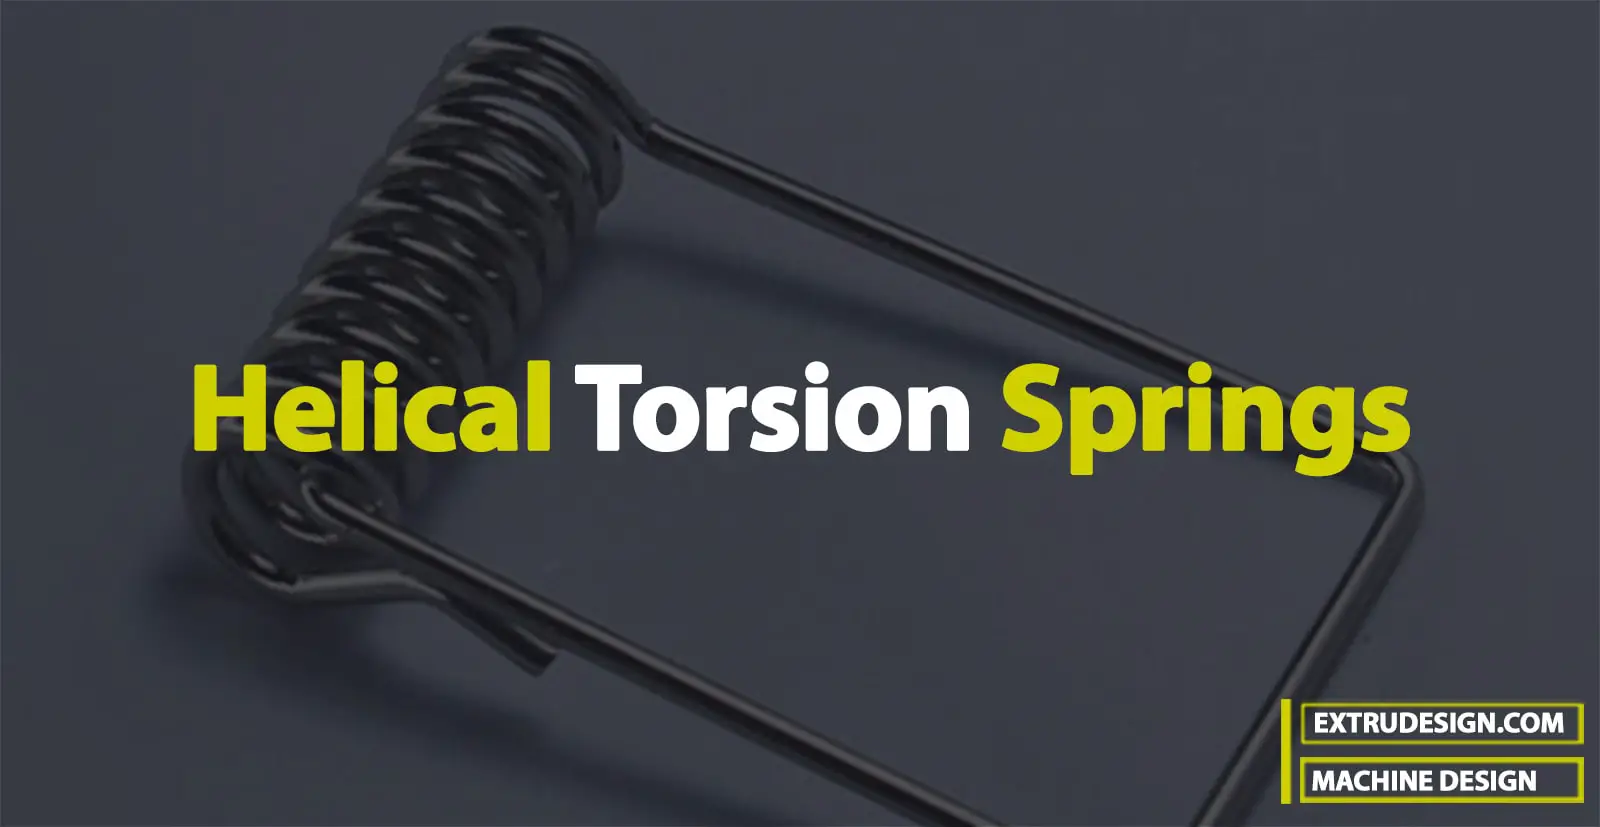 what are Helical Torsion Springs?